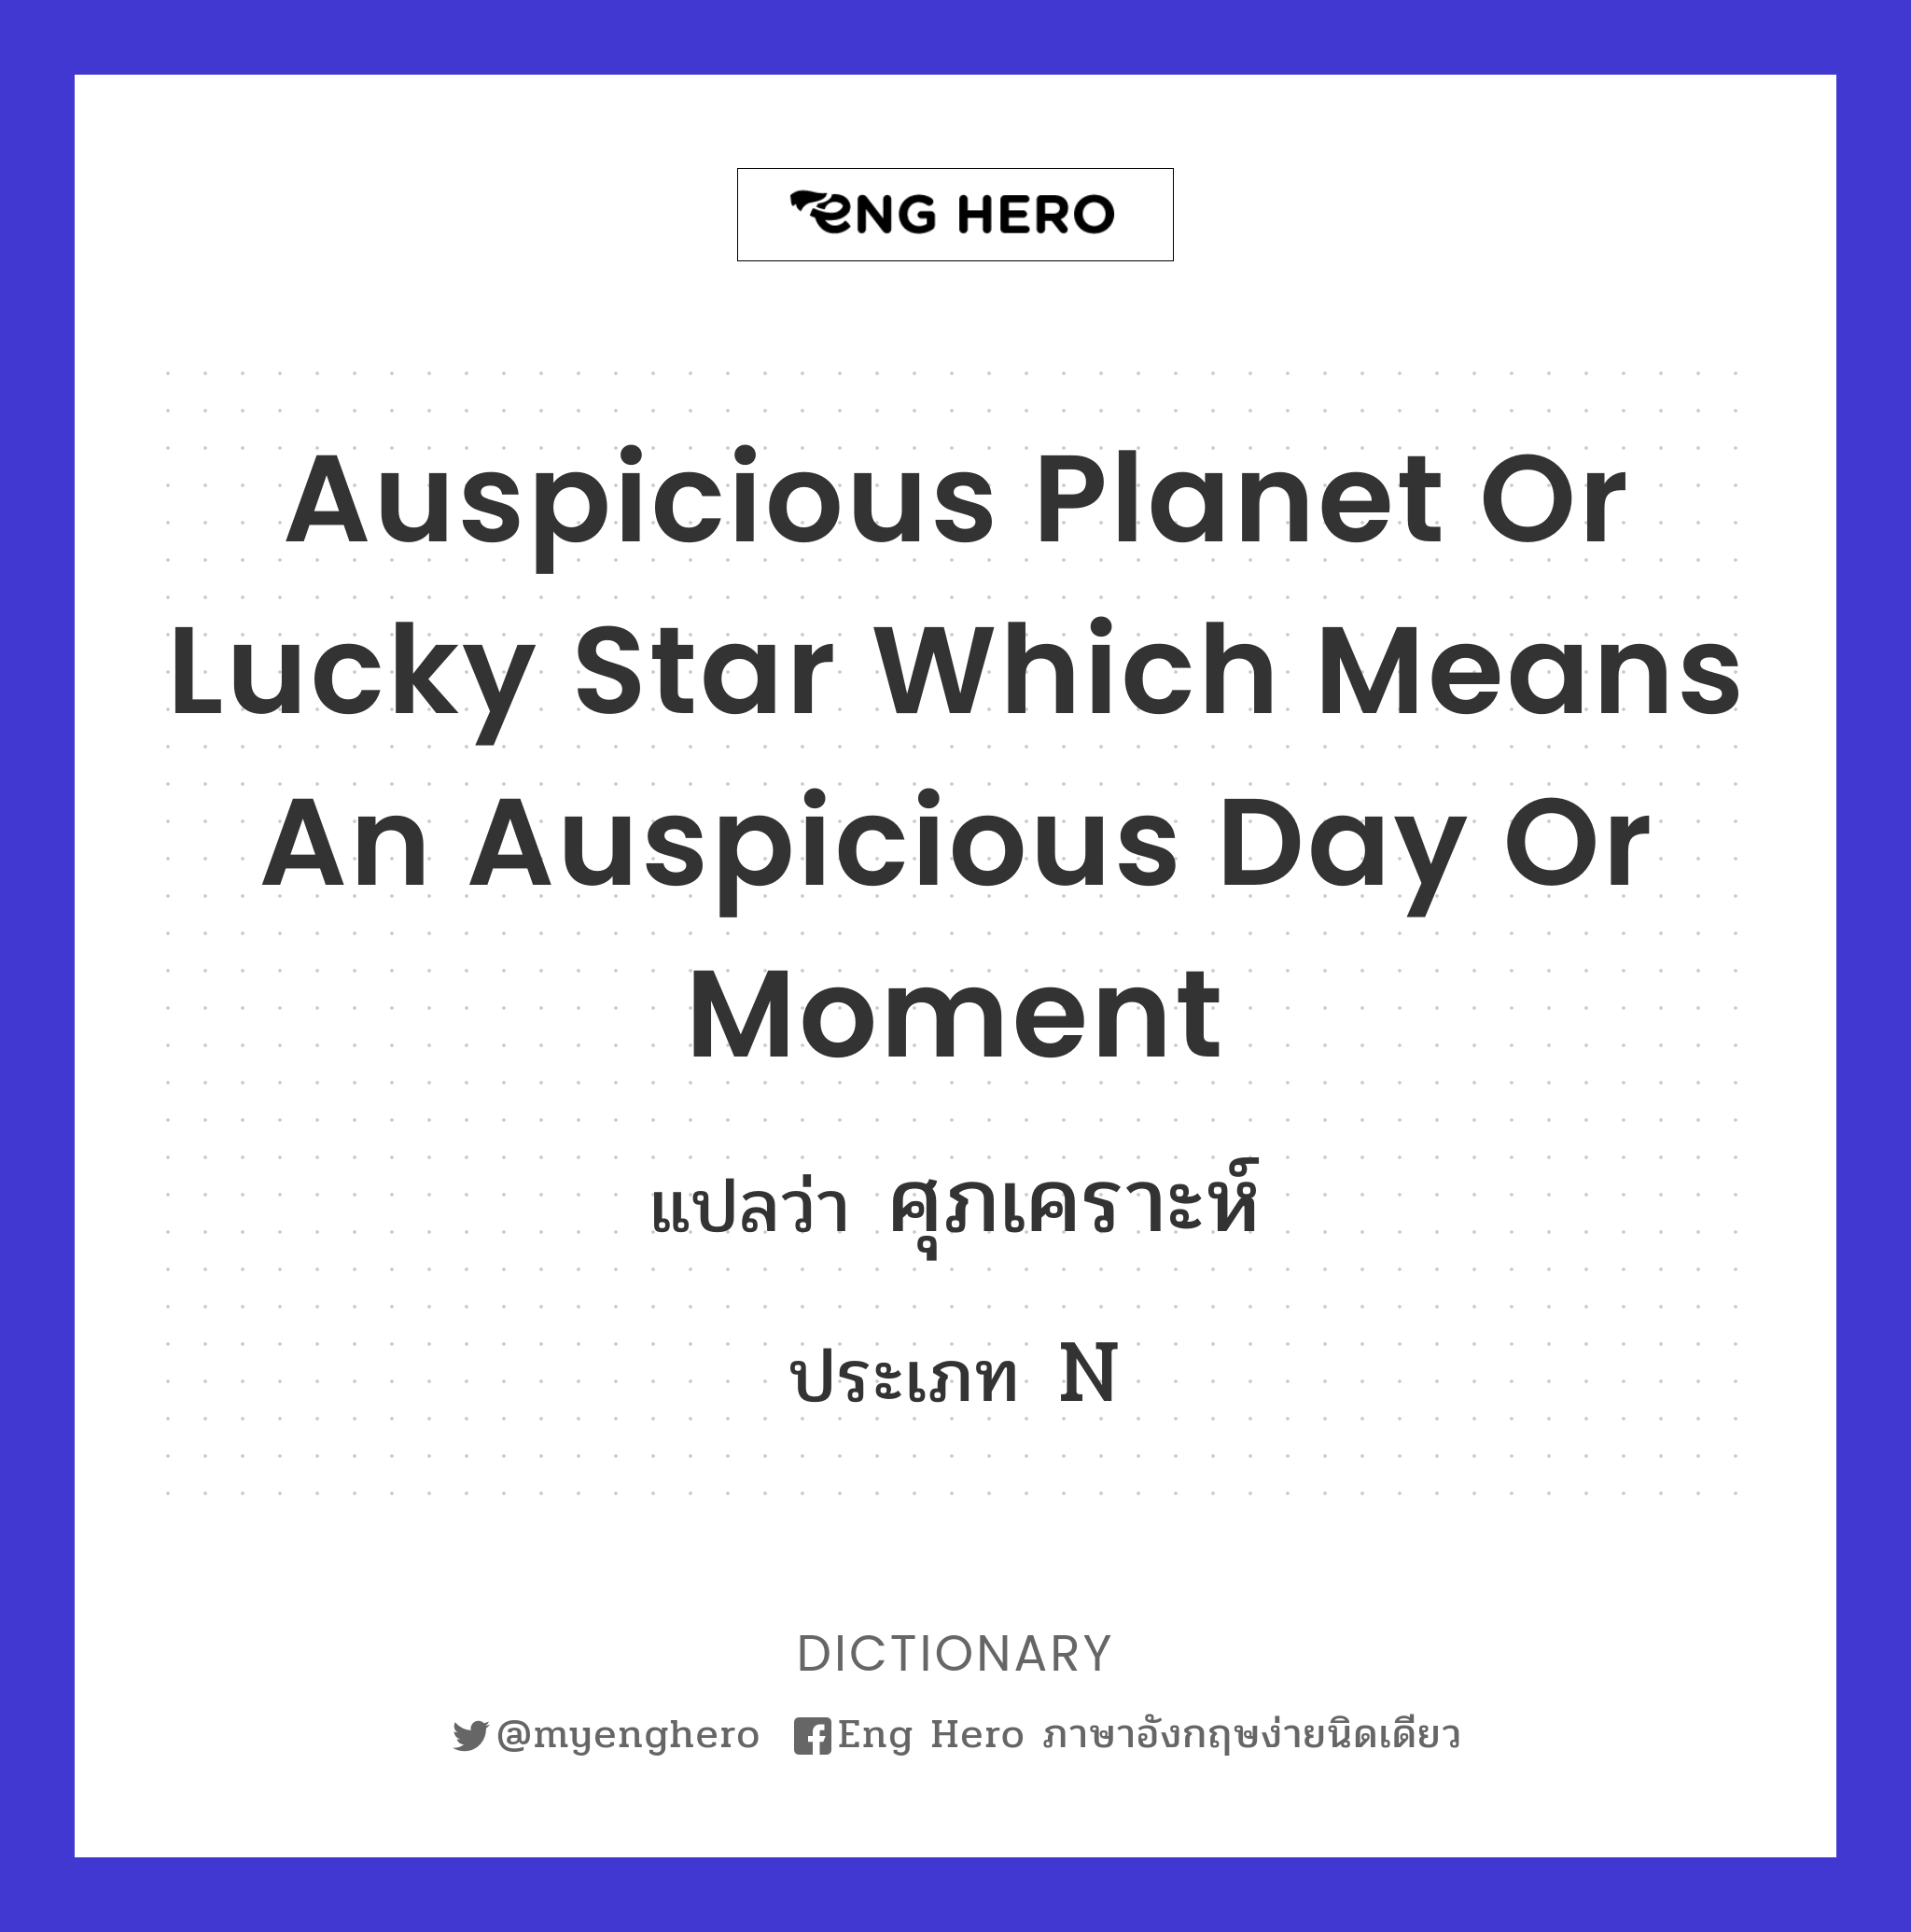 auspicious planet or lucky star which means an auspicious day or moment